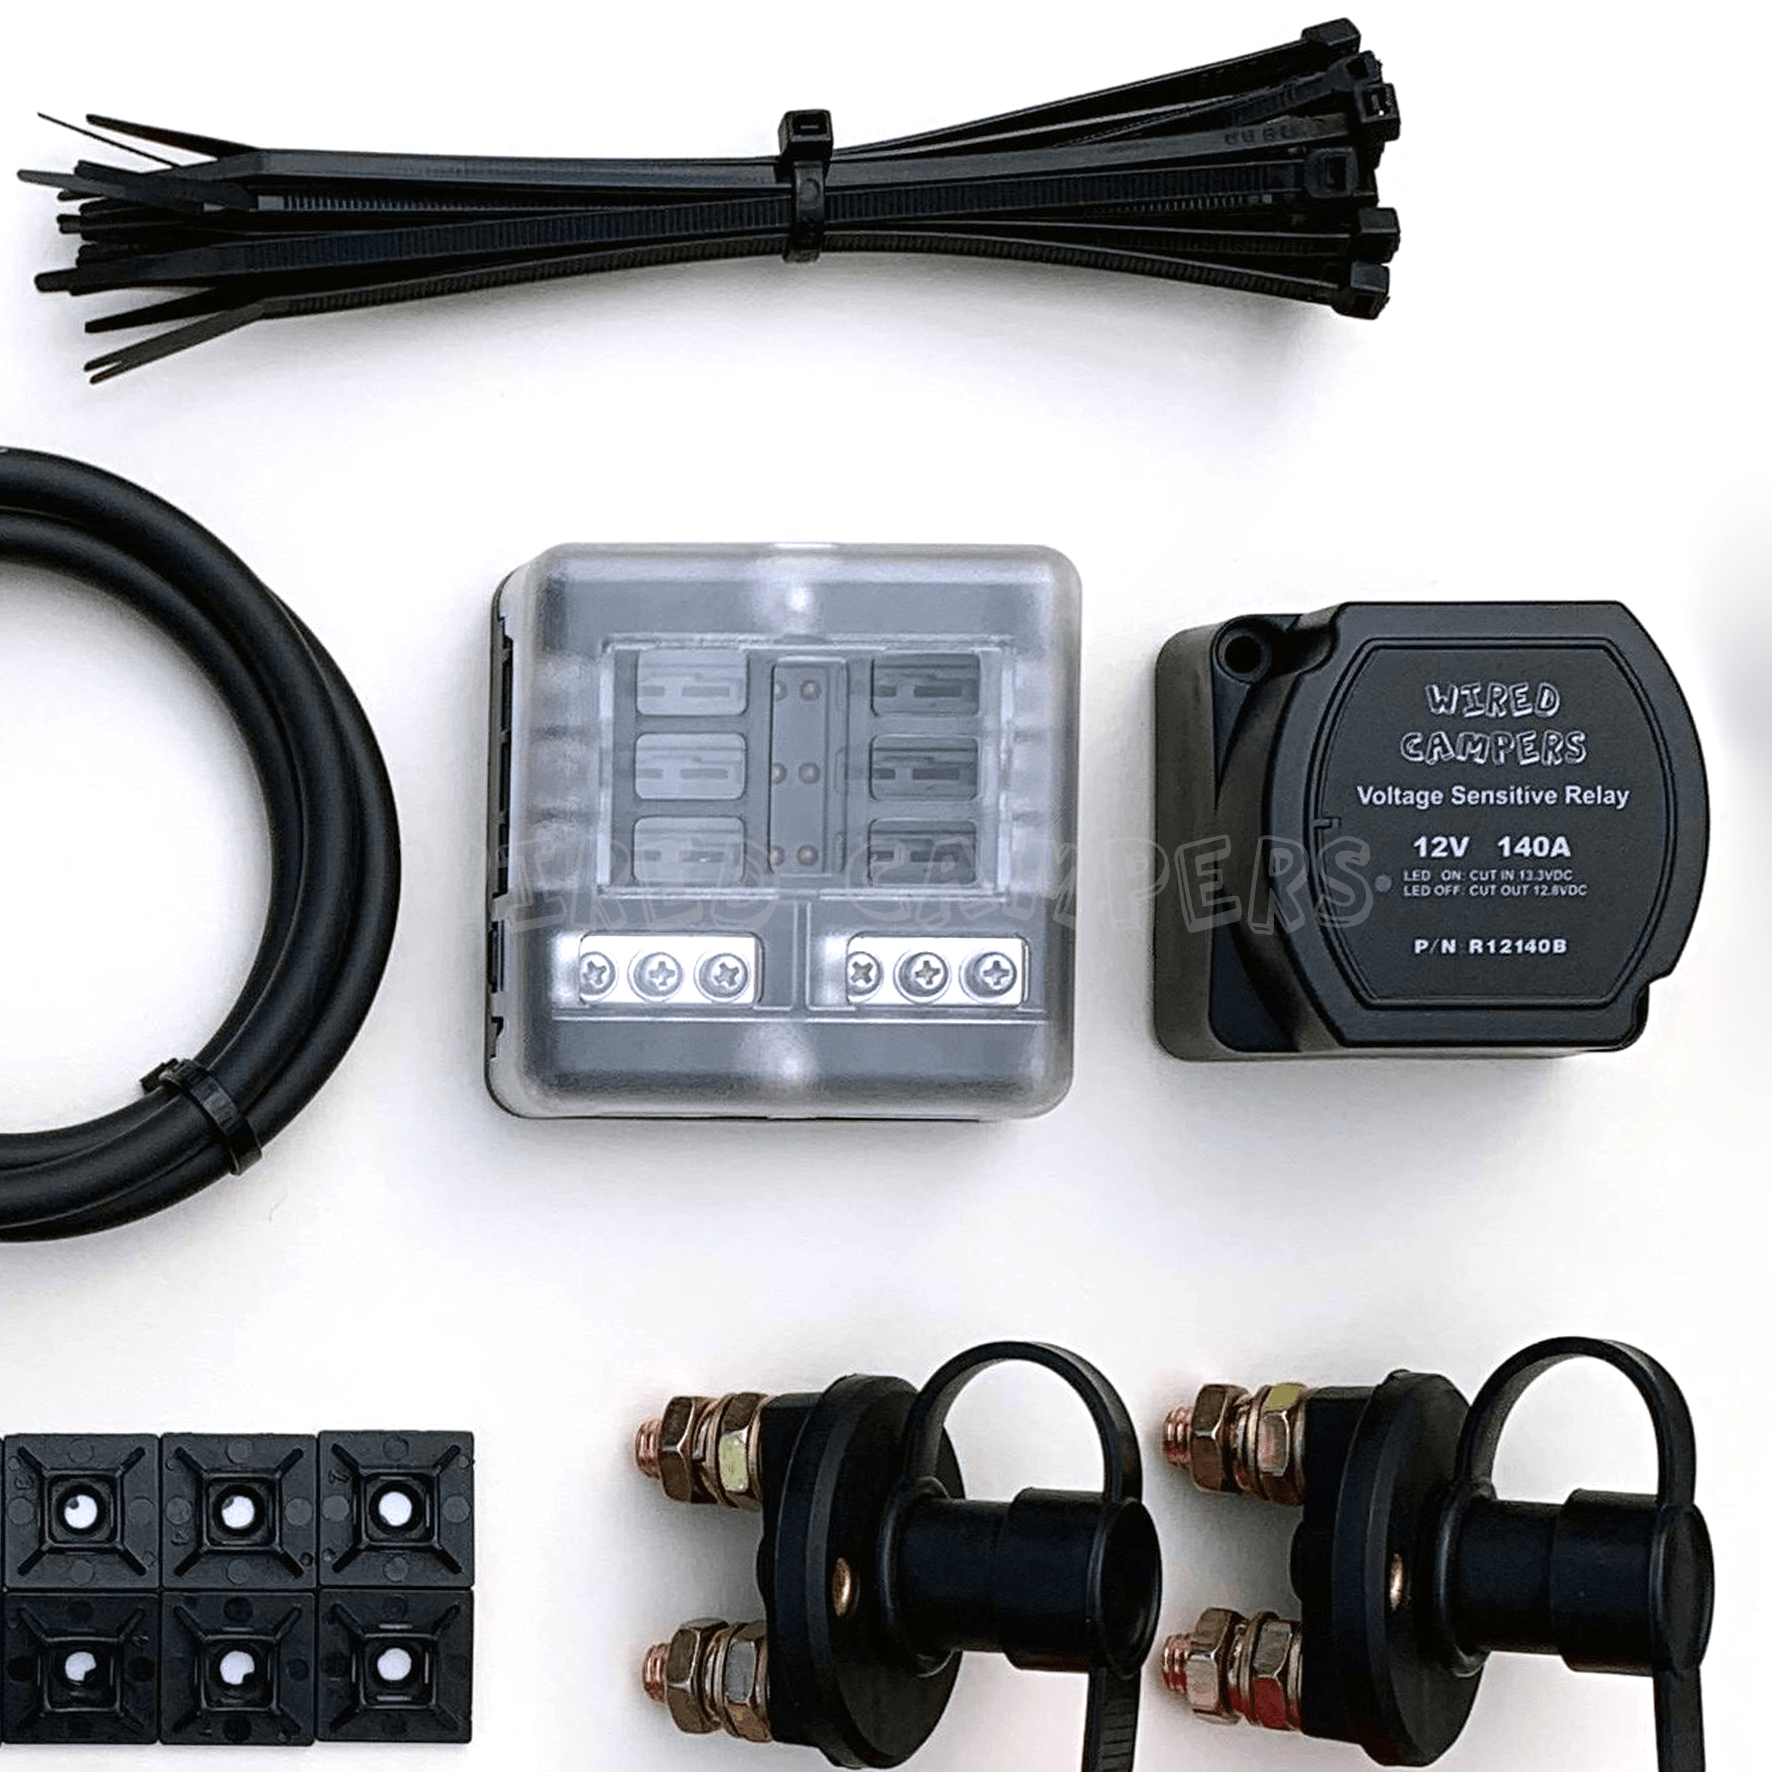 Wired Campers Split Charge Relay 3M/5M/10M High Integrity Voltage Sensitive Split Charge Relay Camper Van Kit